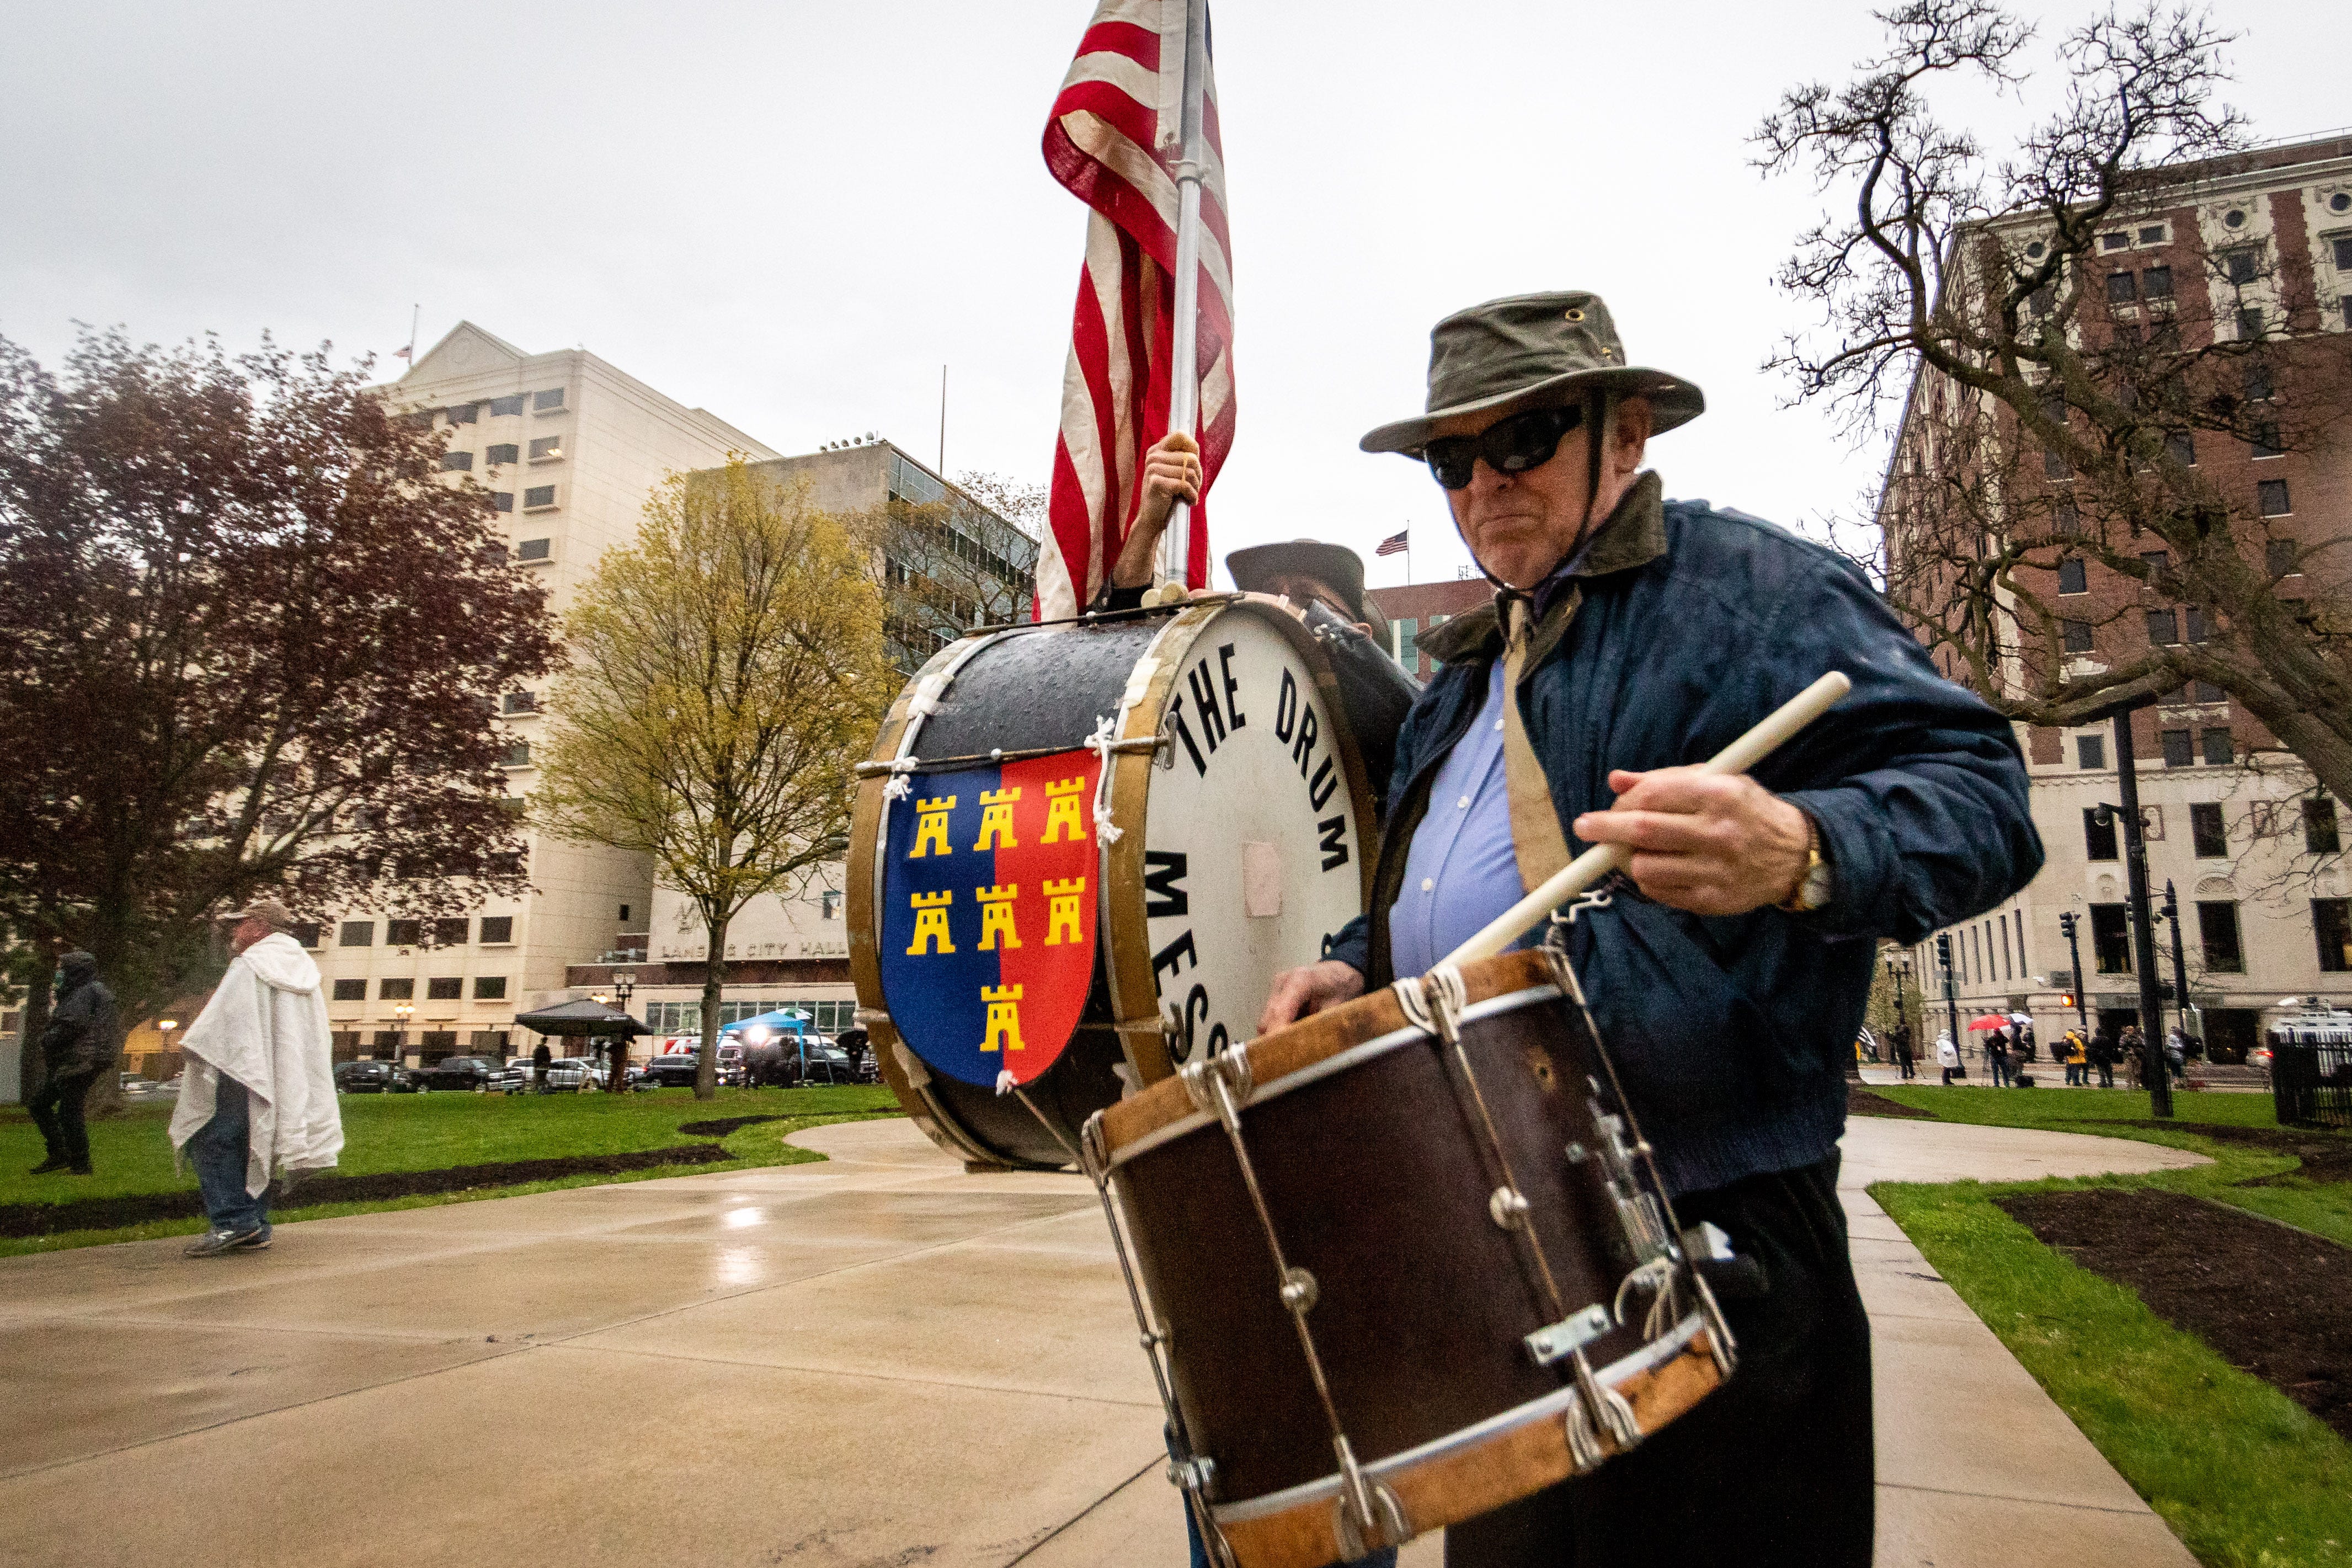 Rob Schneider, center, and Mike Renner, right, both of Royal Oak march in protest. Renner, born in Hungary, escaped from Europe during World War II.  The crest on the front of the drum is his family's crest from the Carpathian Saxons.